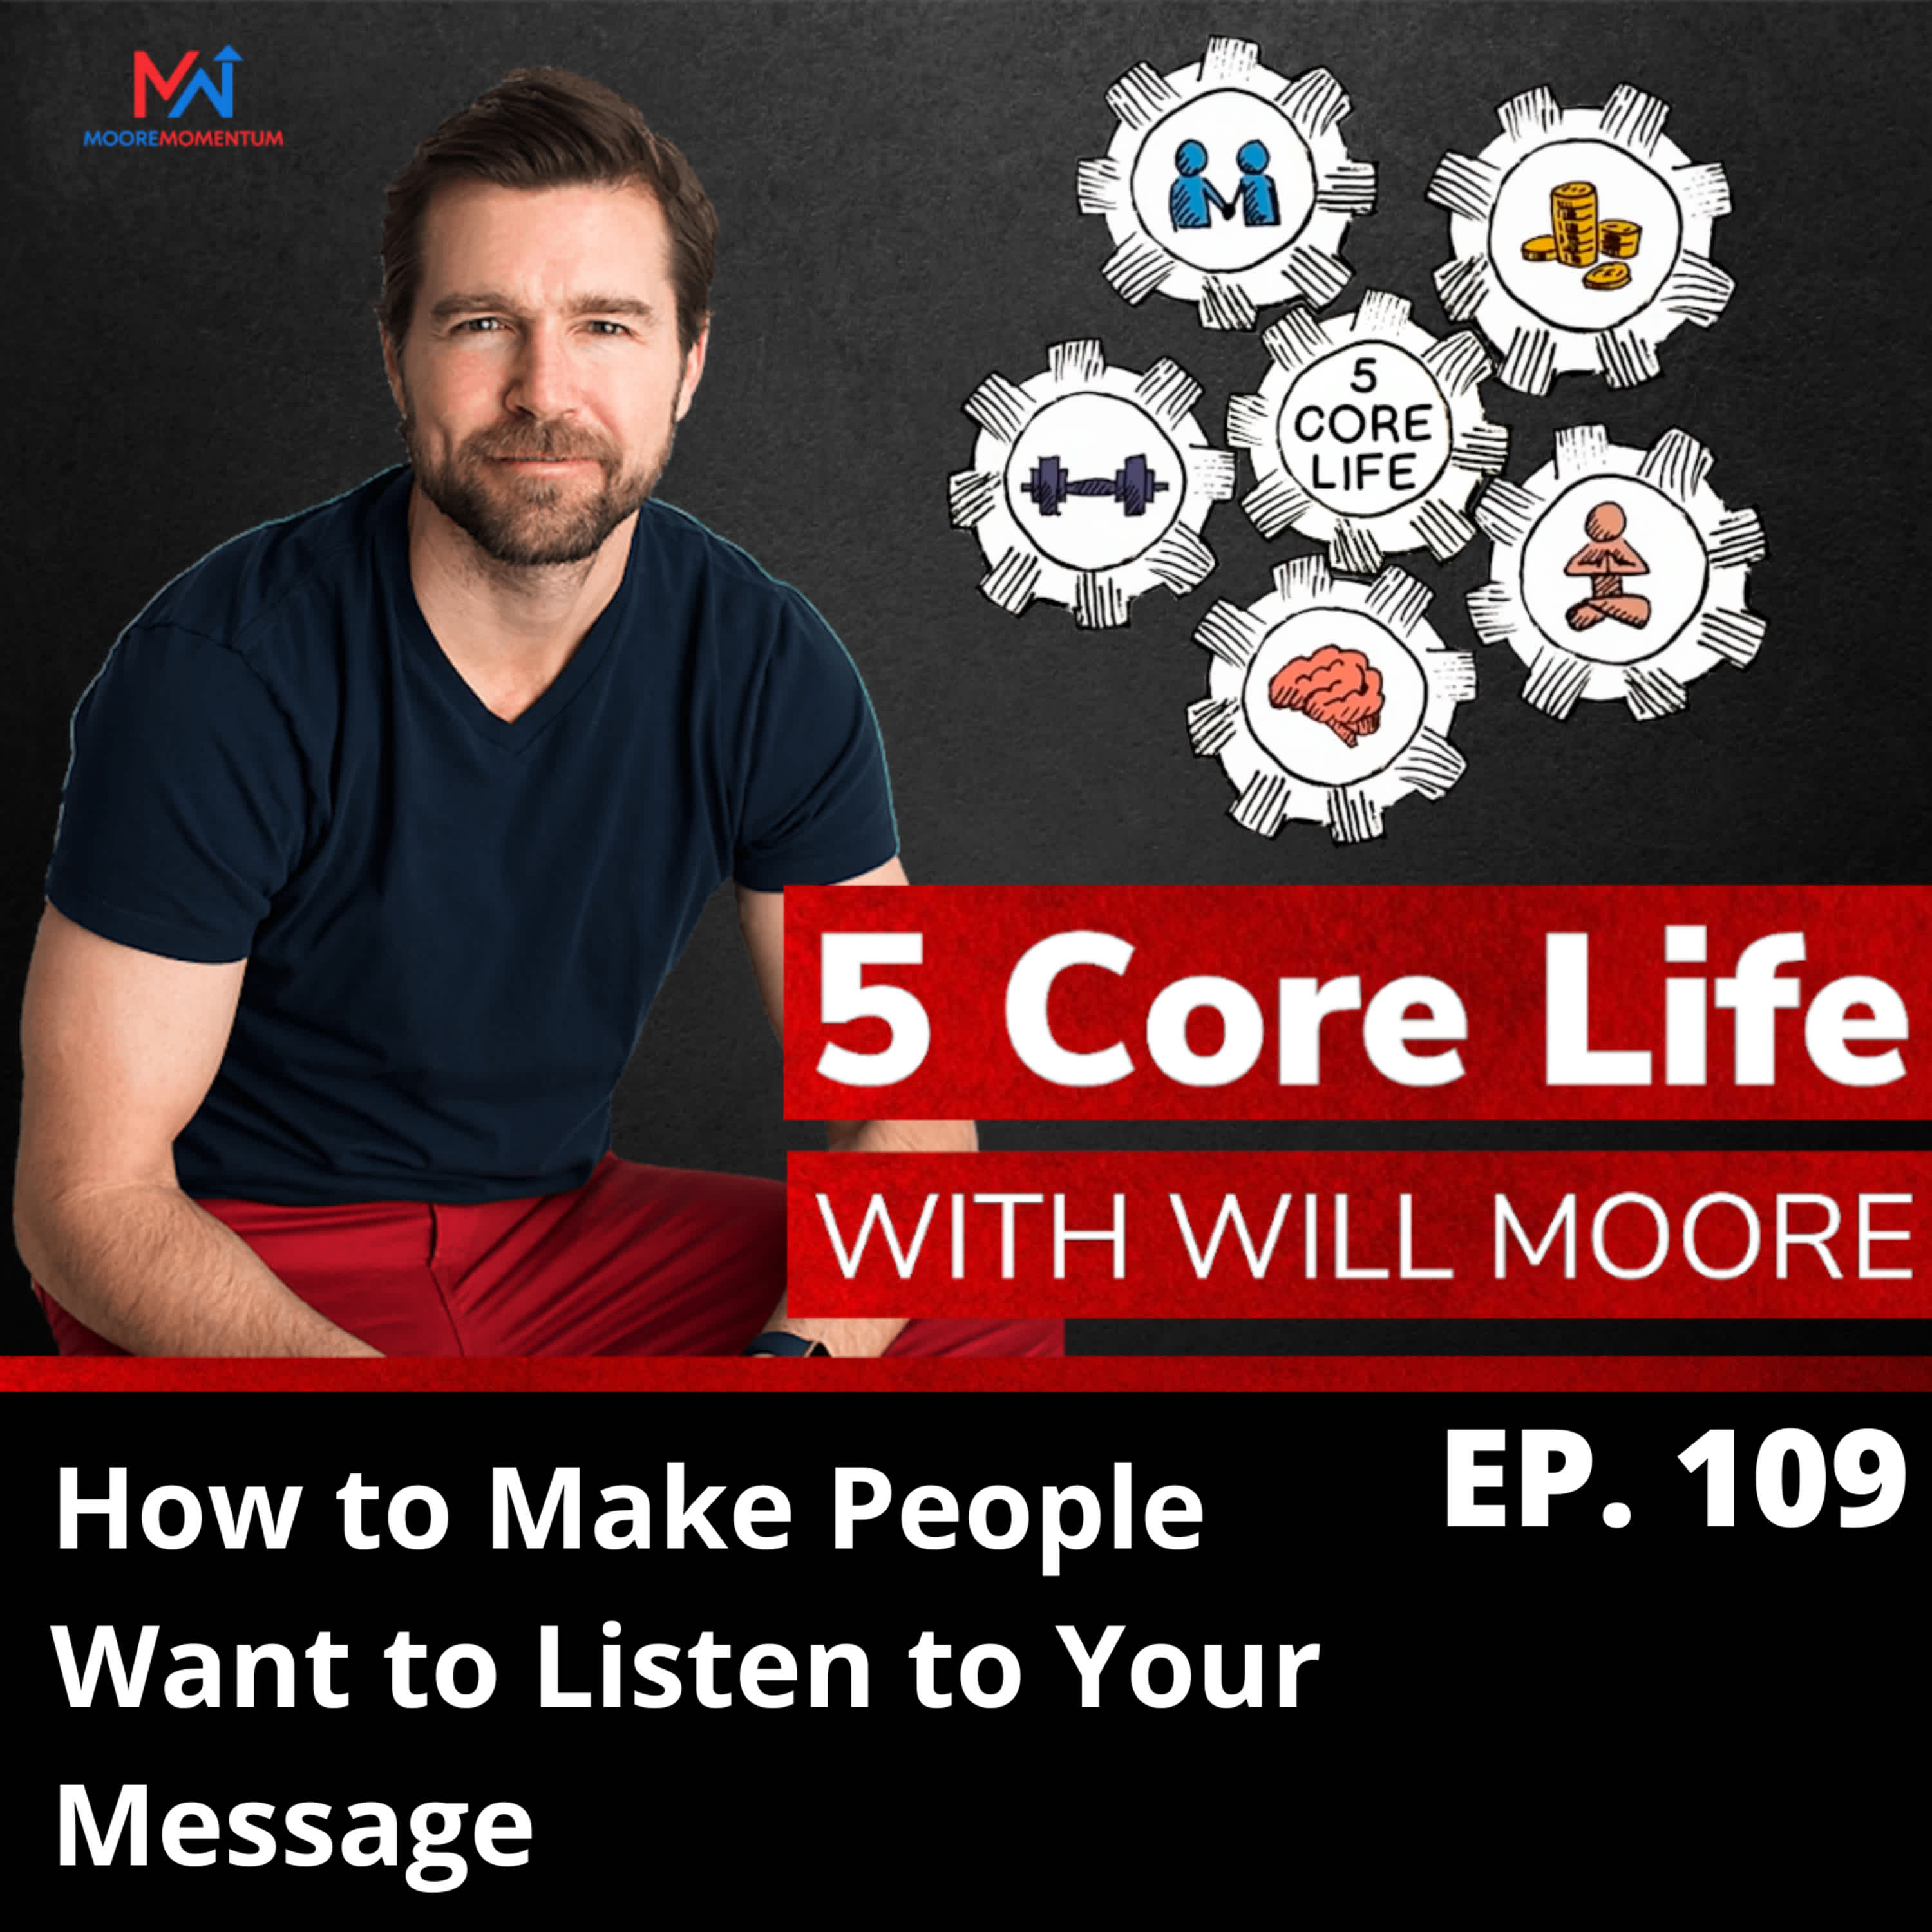 How to Make People Want to Listen to Your Message